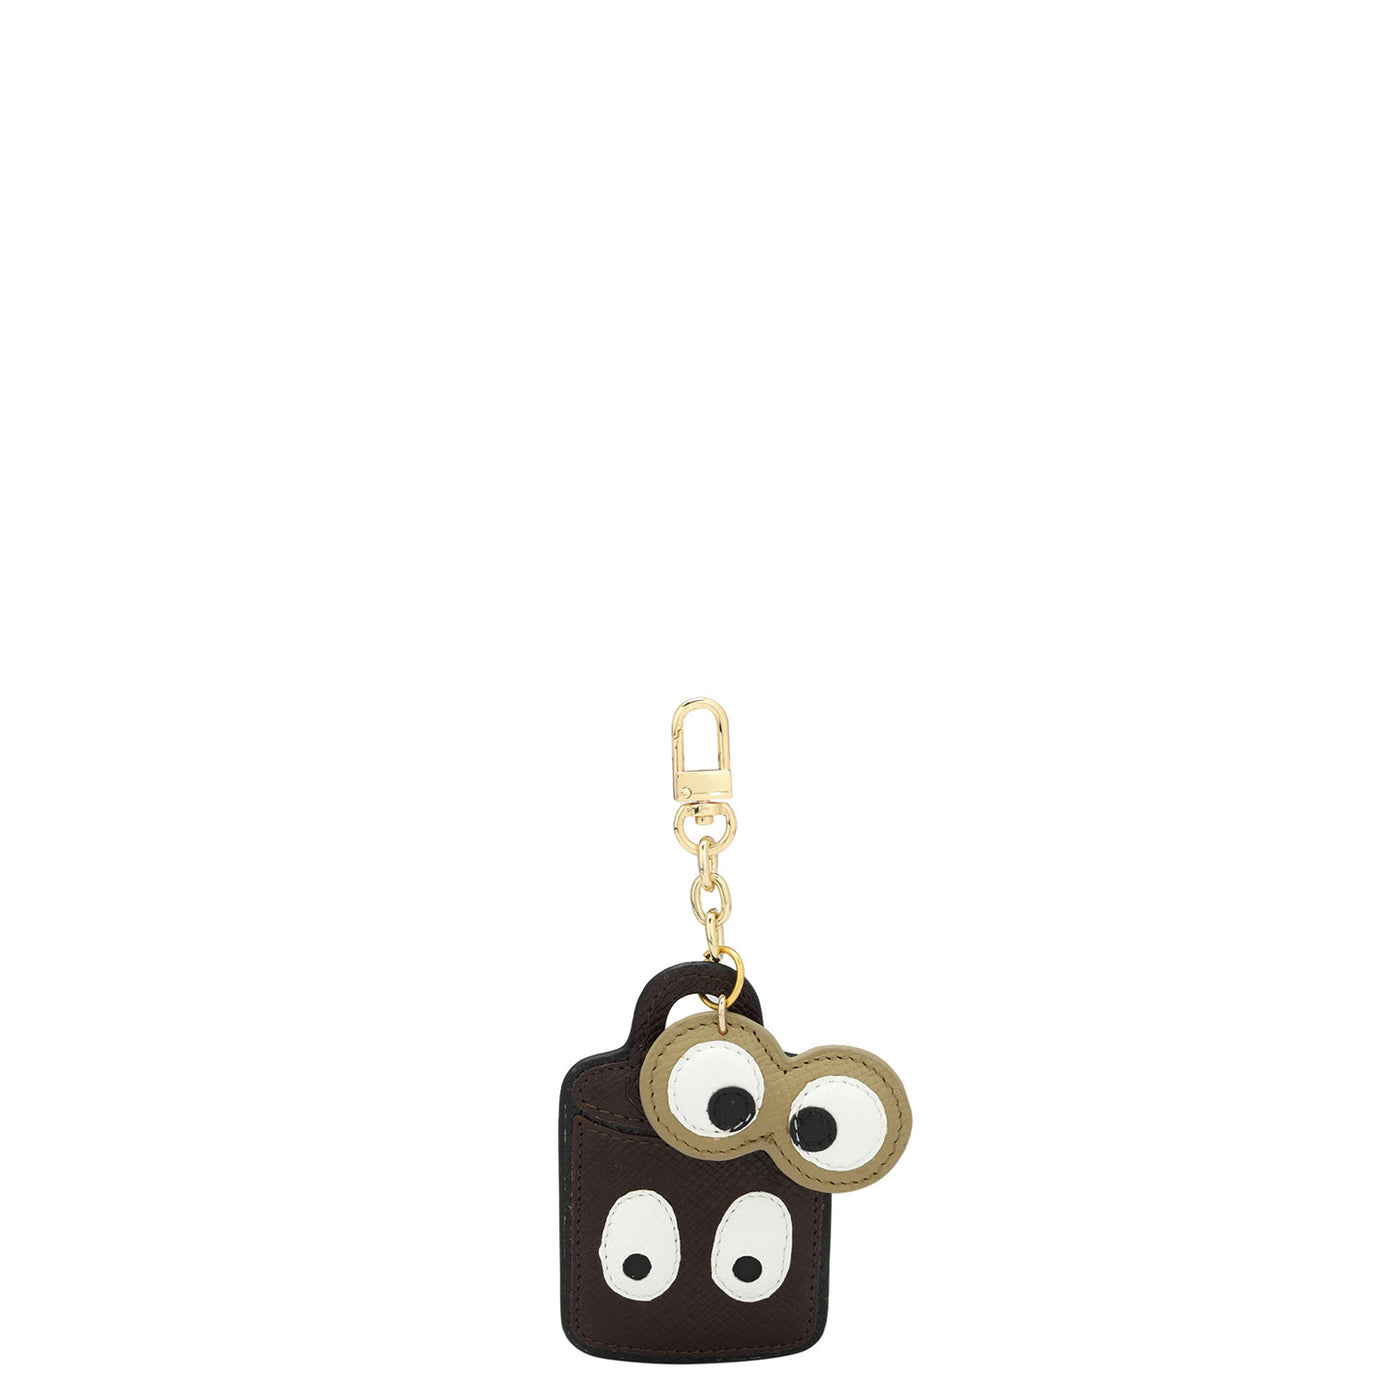 Franzy Leather Bag Hanging - Chocolate